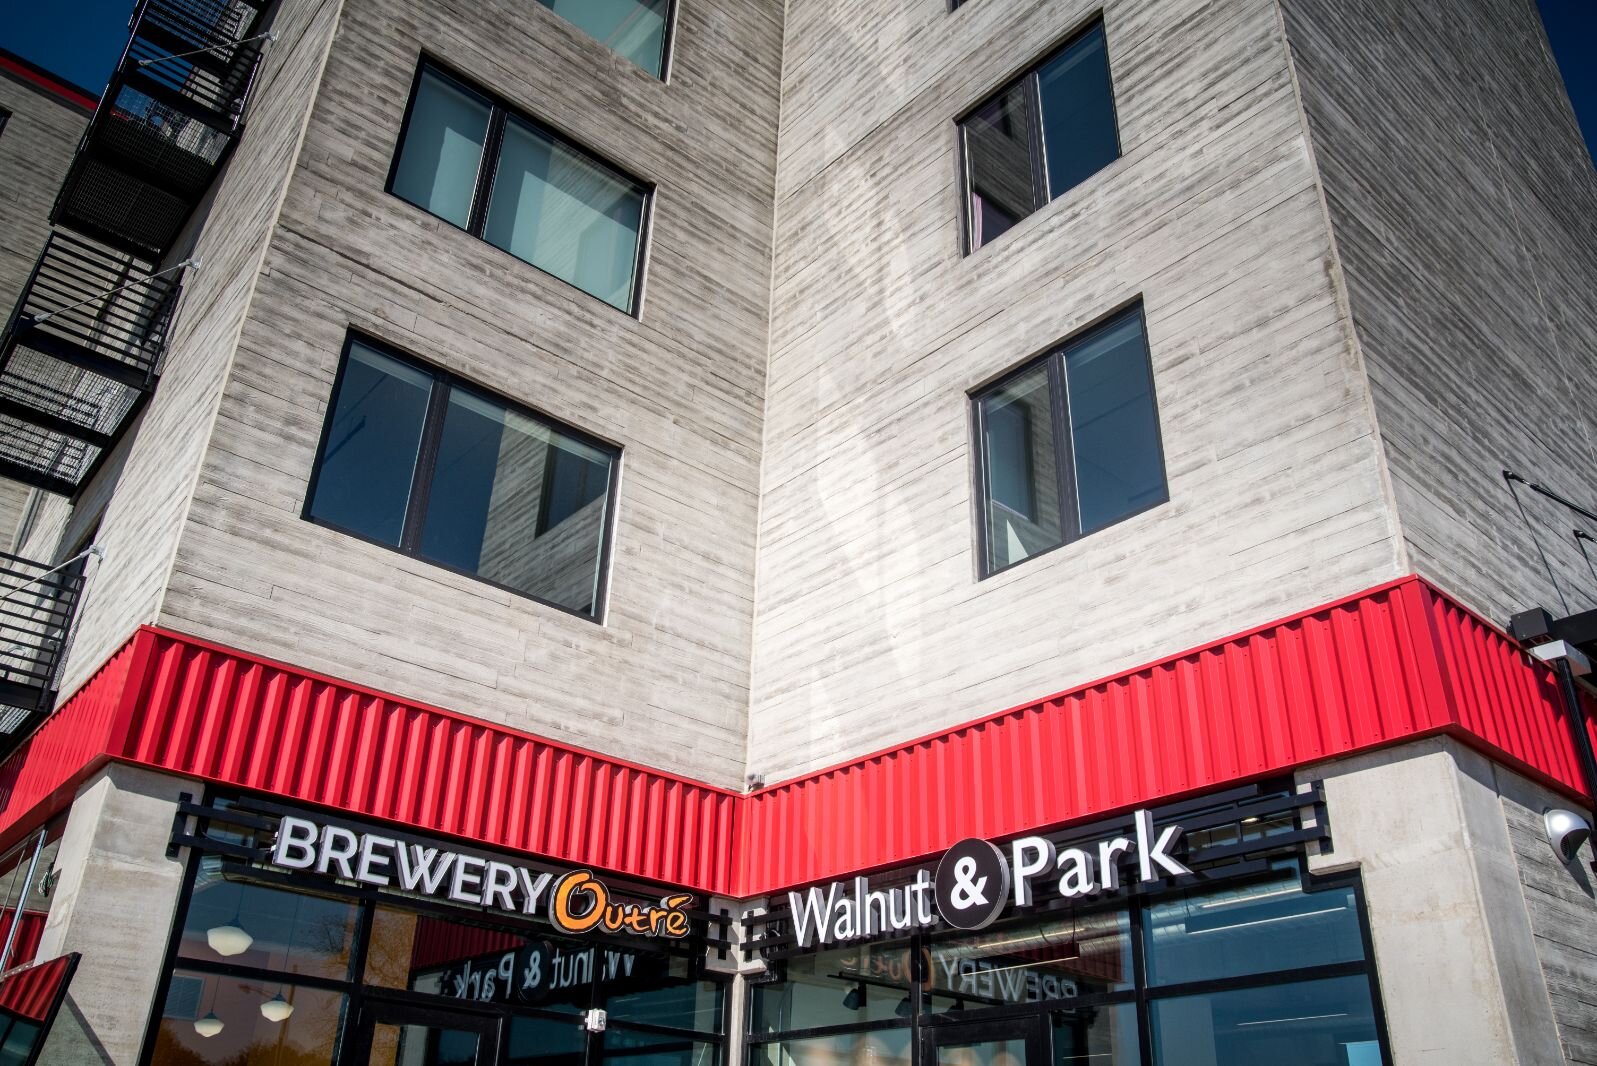 The Brewery Outre and Walnut & Park coffee shop are on the ground-floor of Harrison Circle Apartments.